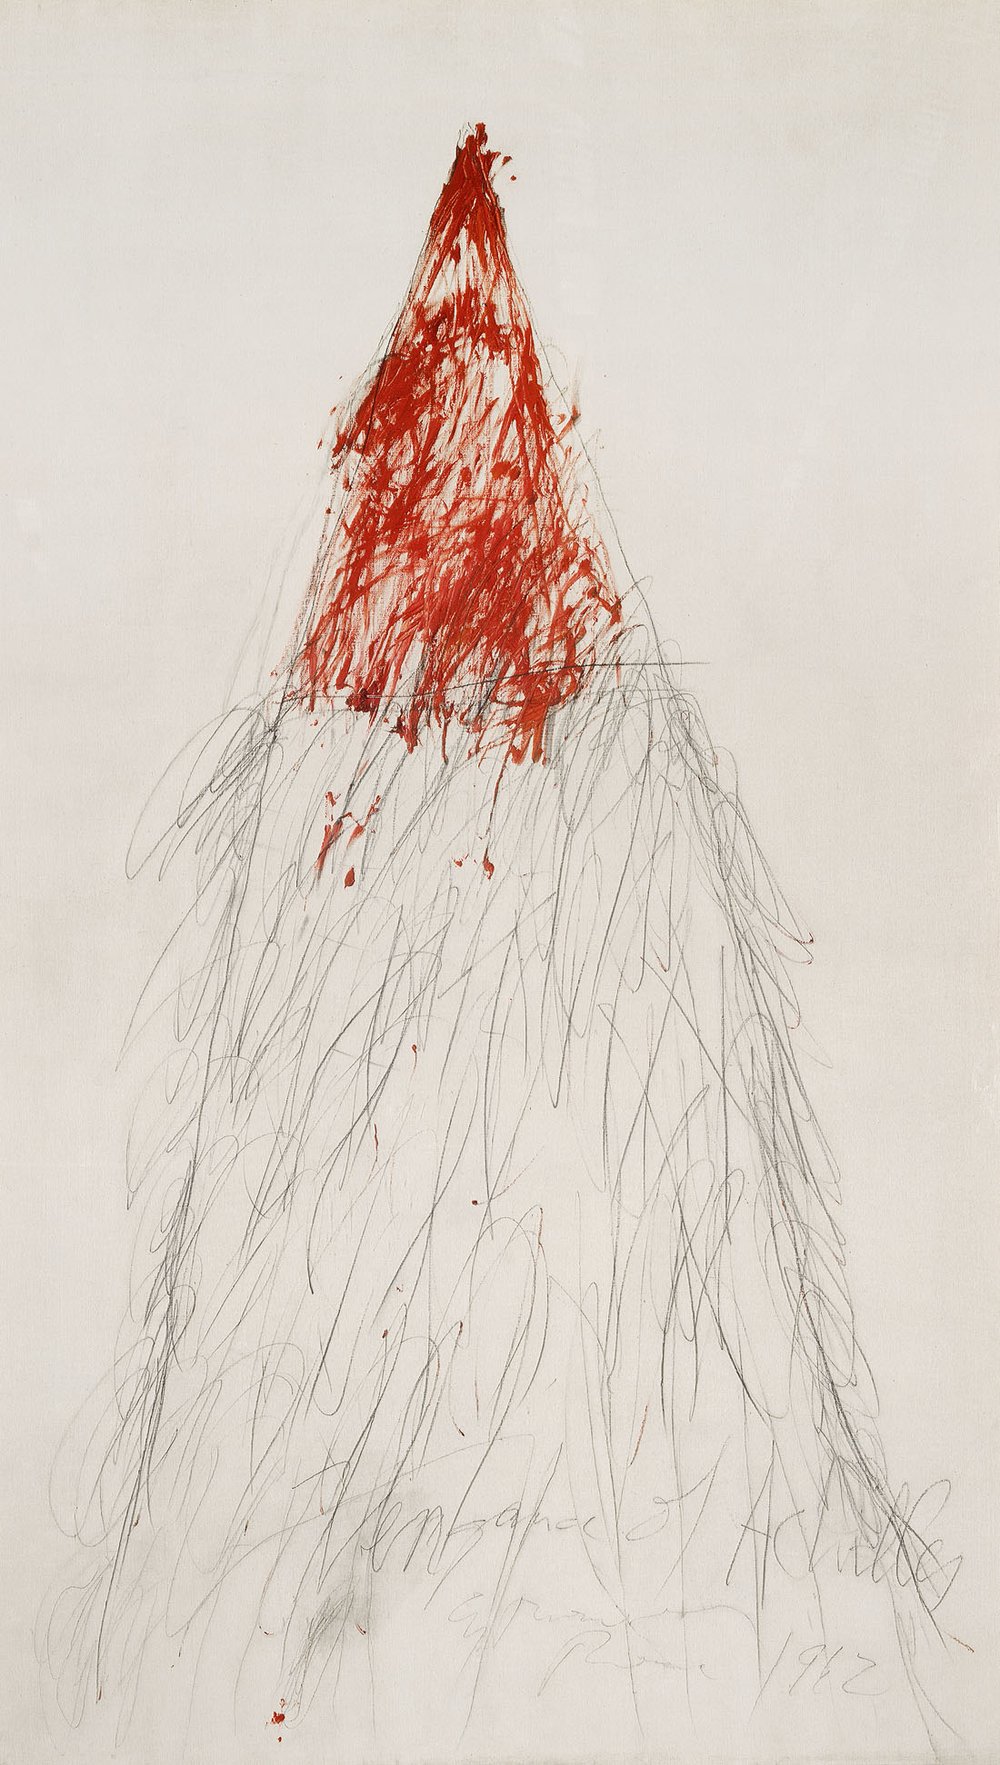 Cy Twombly, Vengeance of Achilles, 1962. Source: Cy Twombly Foundation. 